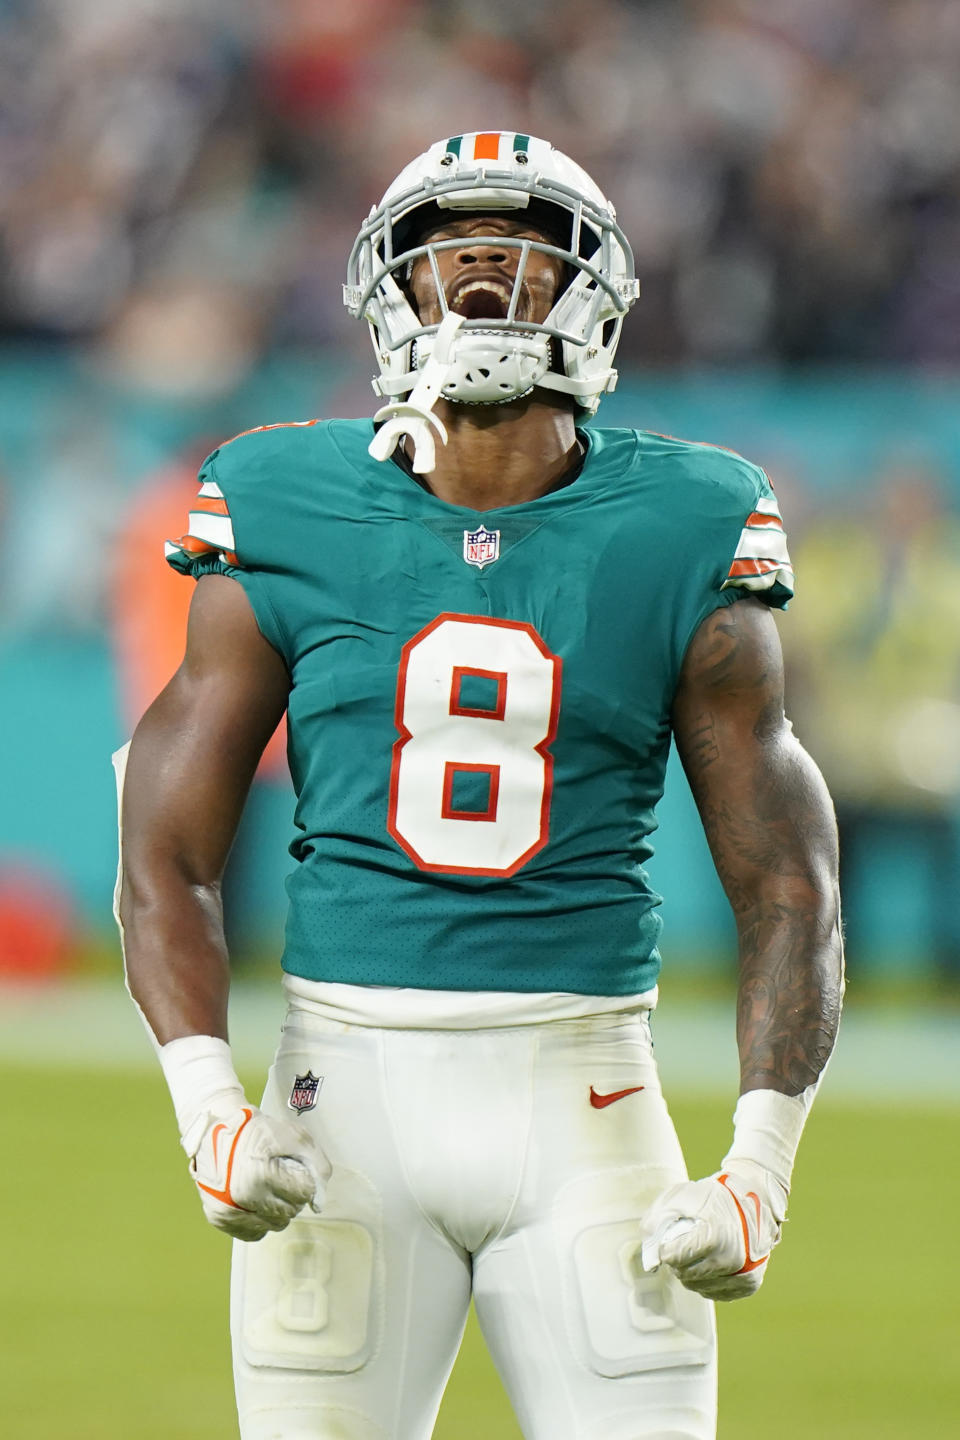 Miami Dolphins free safety Jevon Holland (8) celebrates after making a tackle during the second half of an NFL football game against the New England Patriots, Sunday, Jan. 9, 2022, in Miami Gardens, Fla. (AP Photo/Wilfredo Lee)